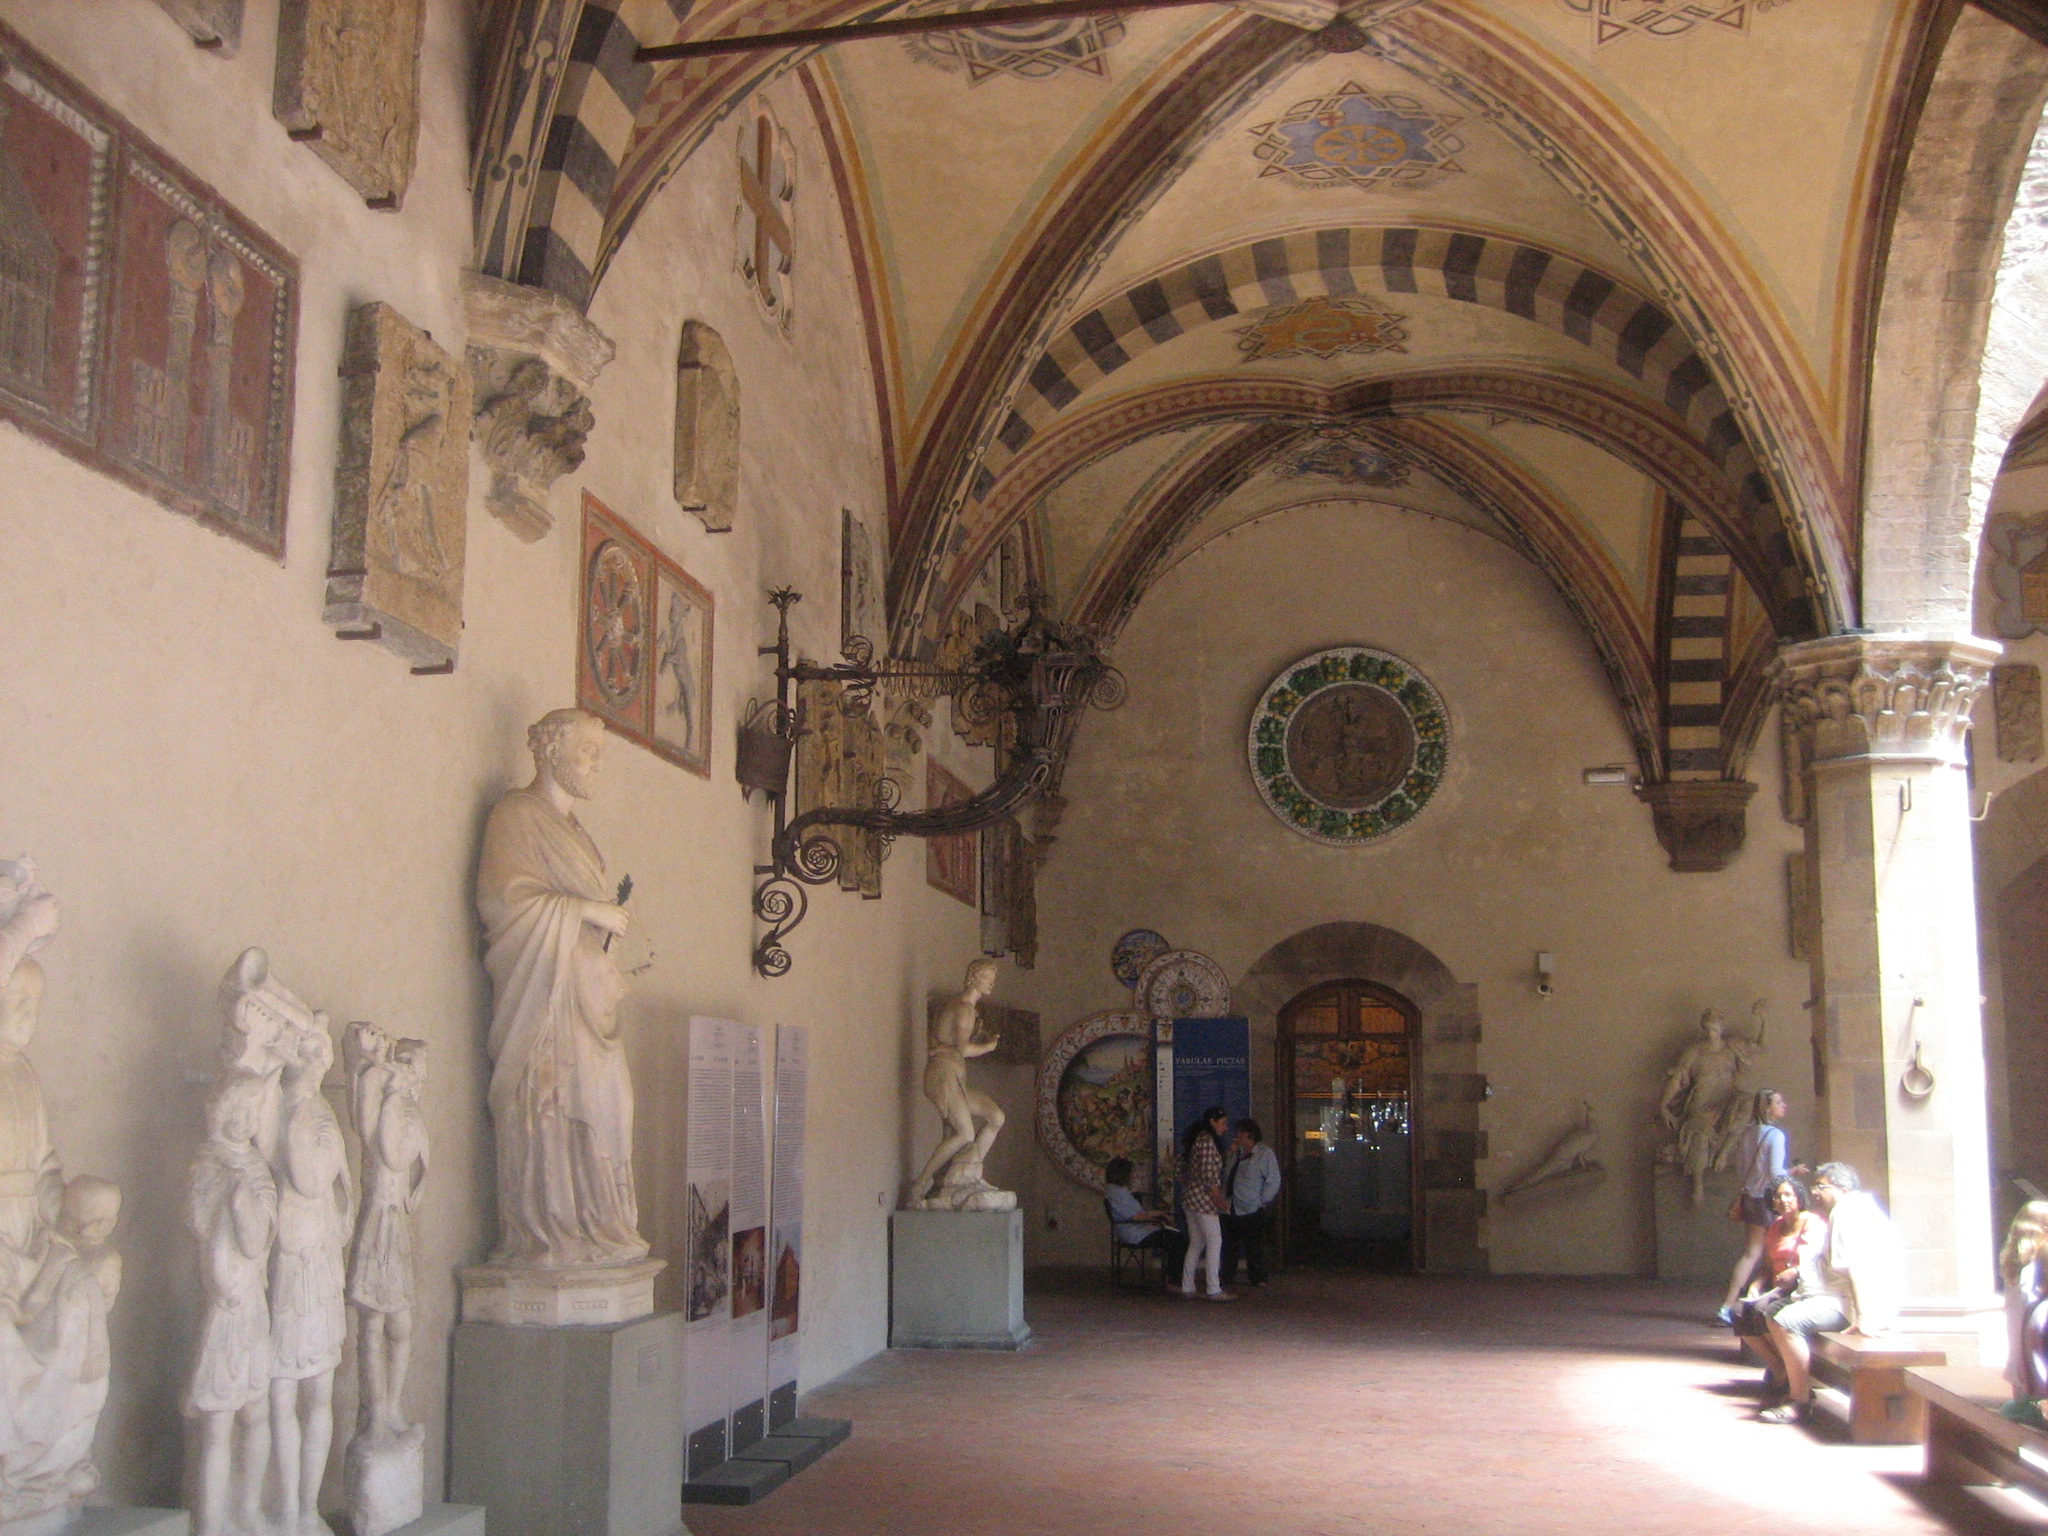 An additional detail of The Bargello Museum